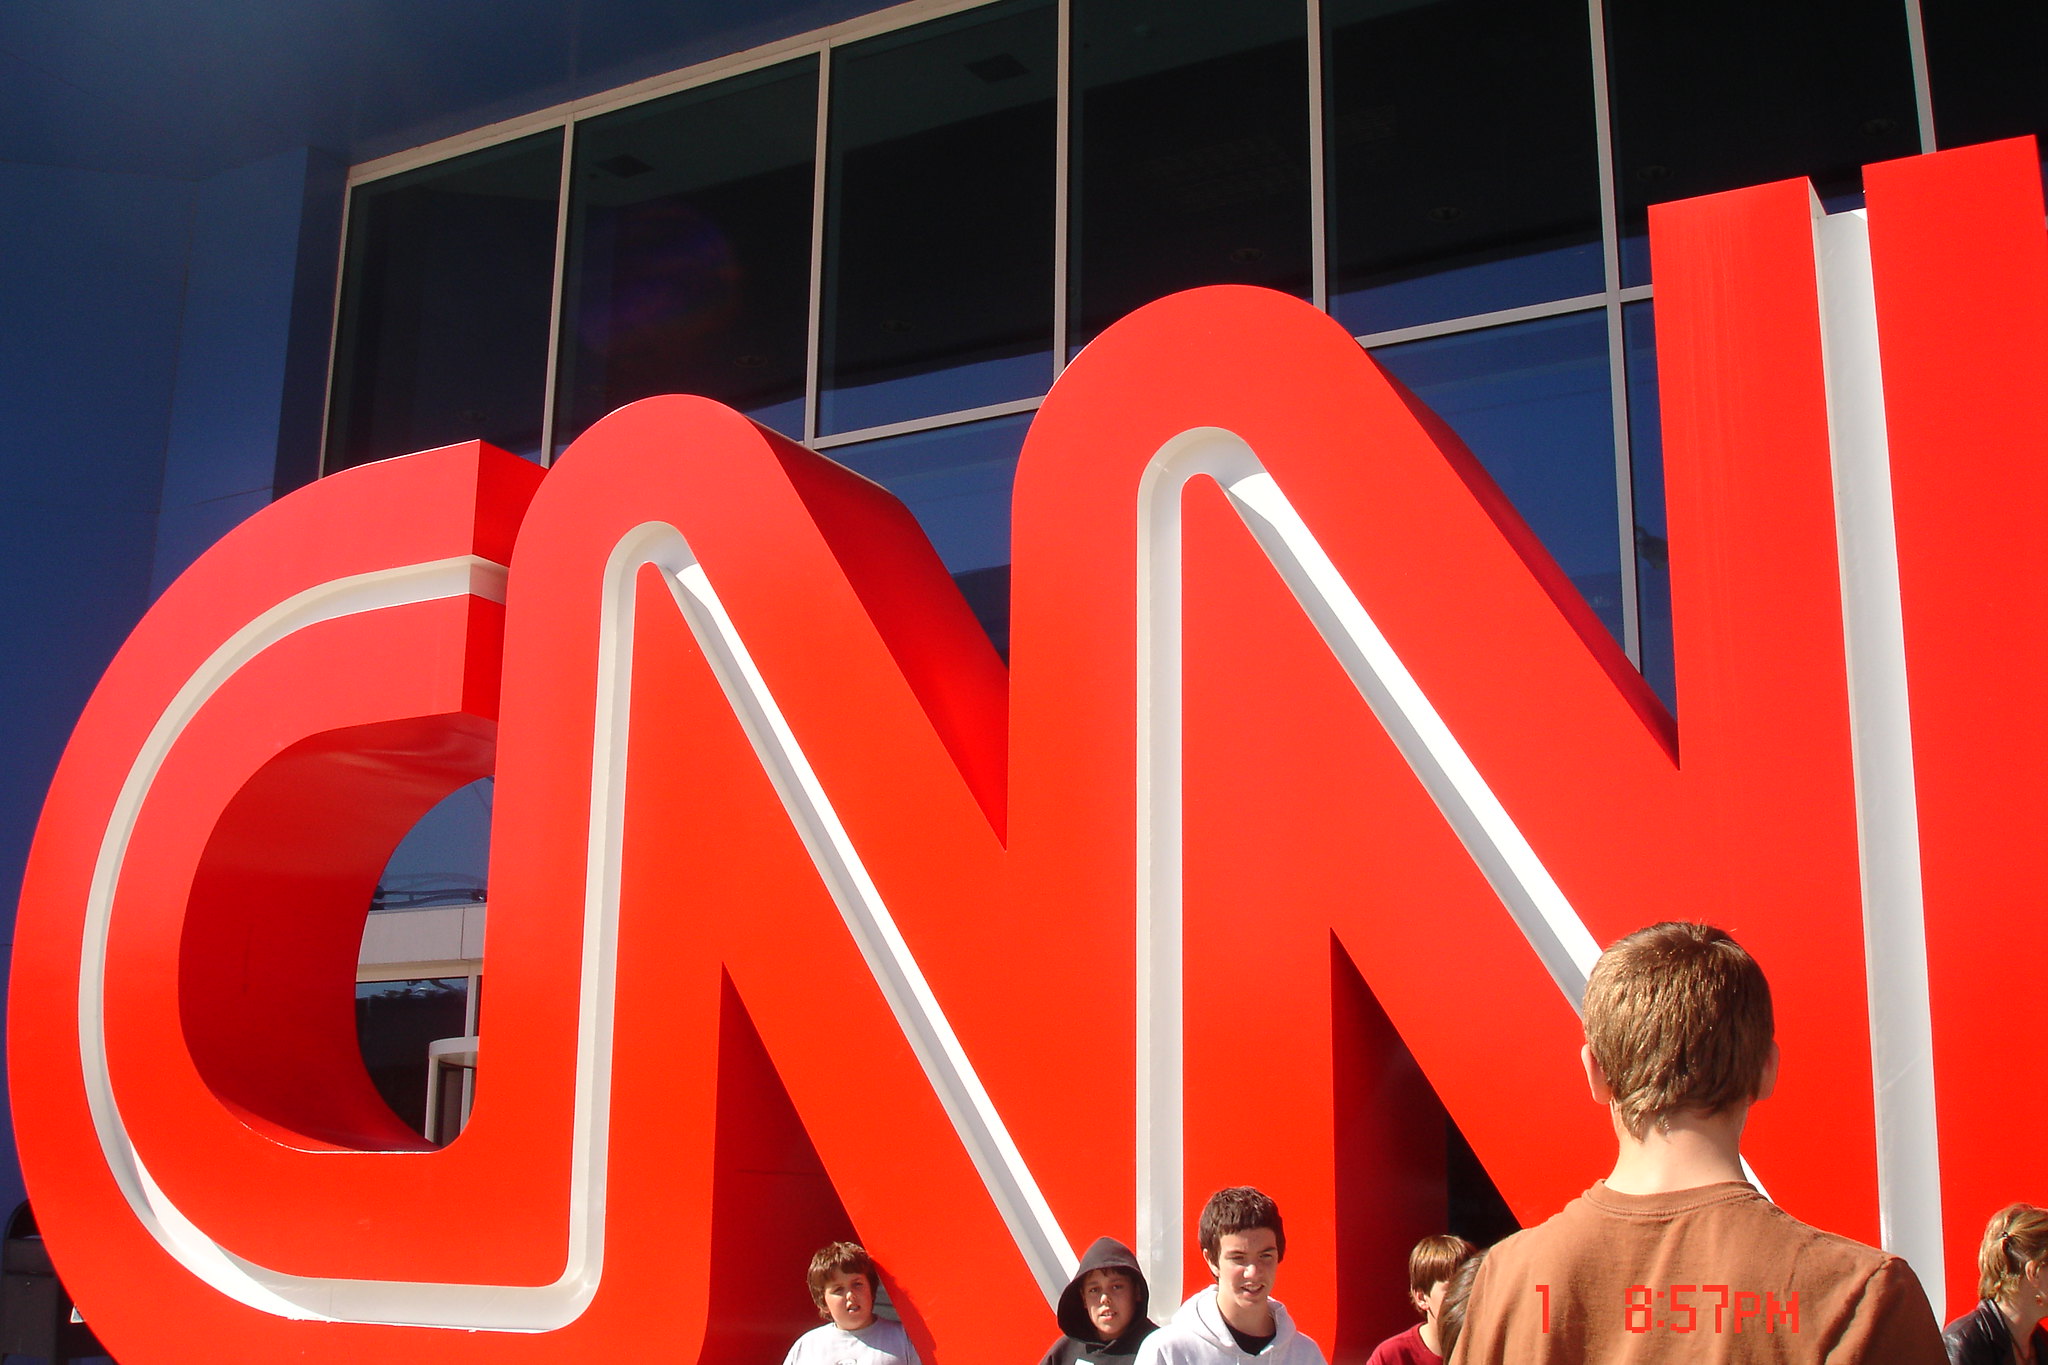 The Drama At CNN Shows The Impossibility Of Fixing The Media